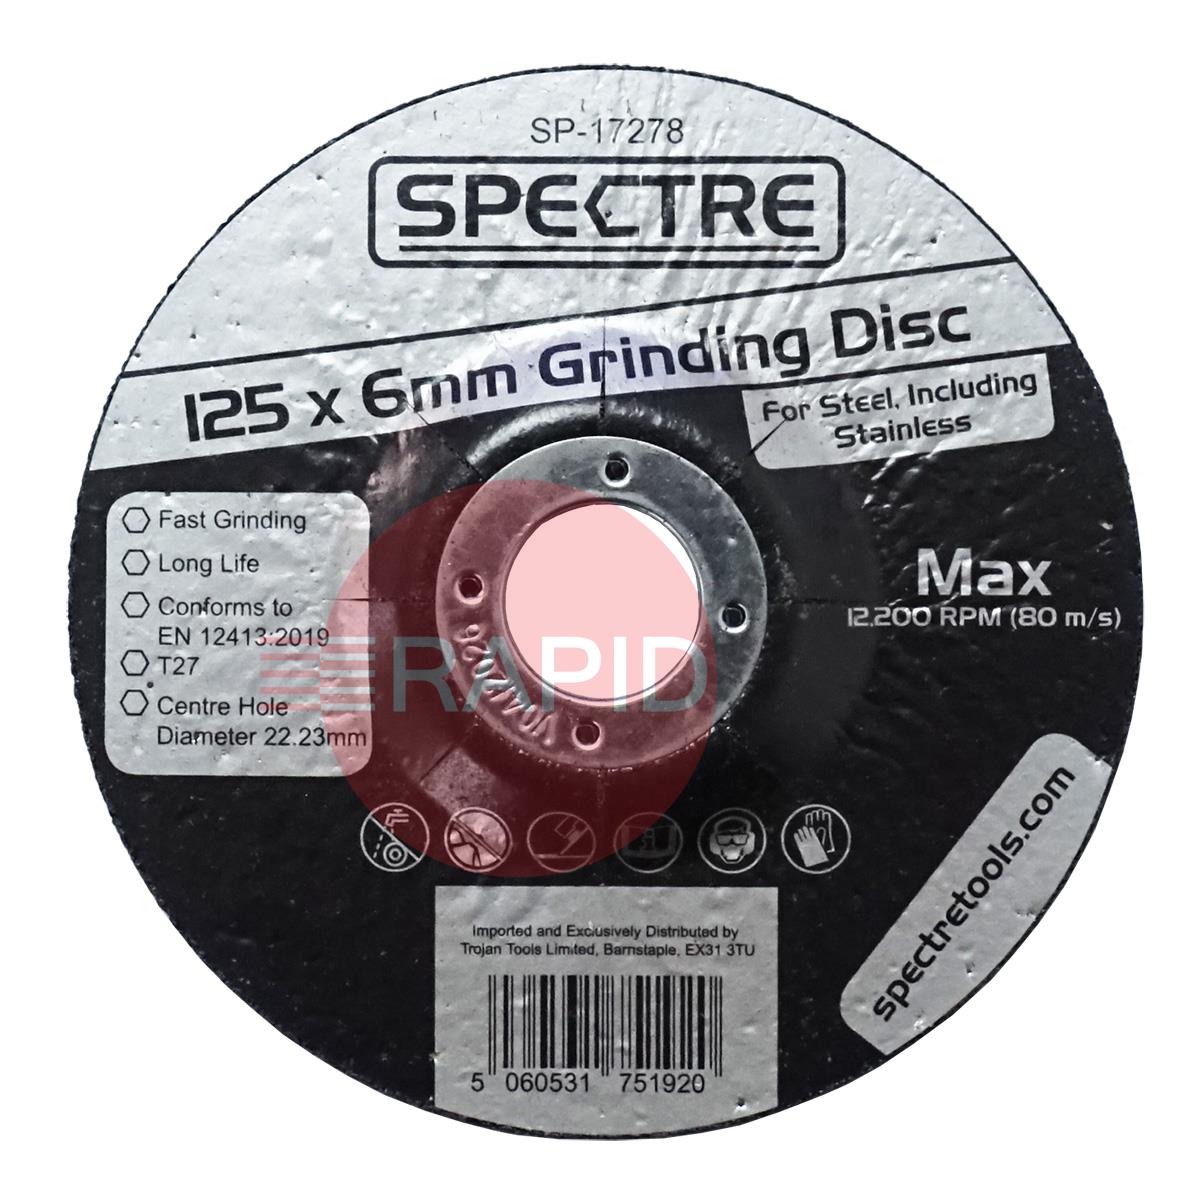 SP-17278  Spectre 125mm (5) Grinding Disc 6mm Thick. Grade T27 for Steel & Stainless Steel.